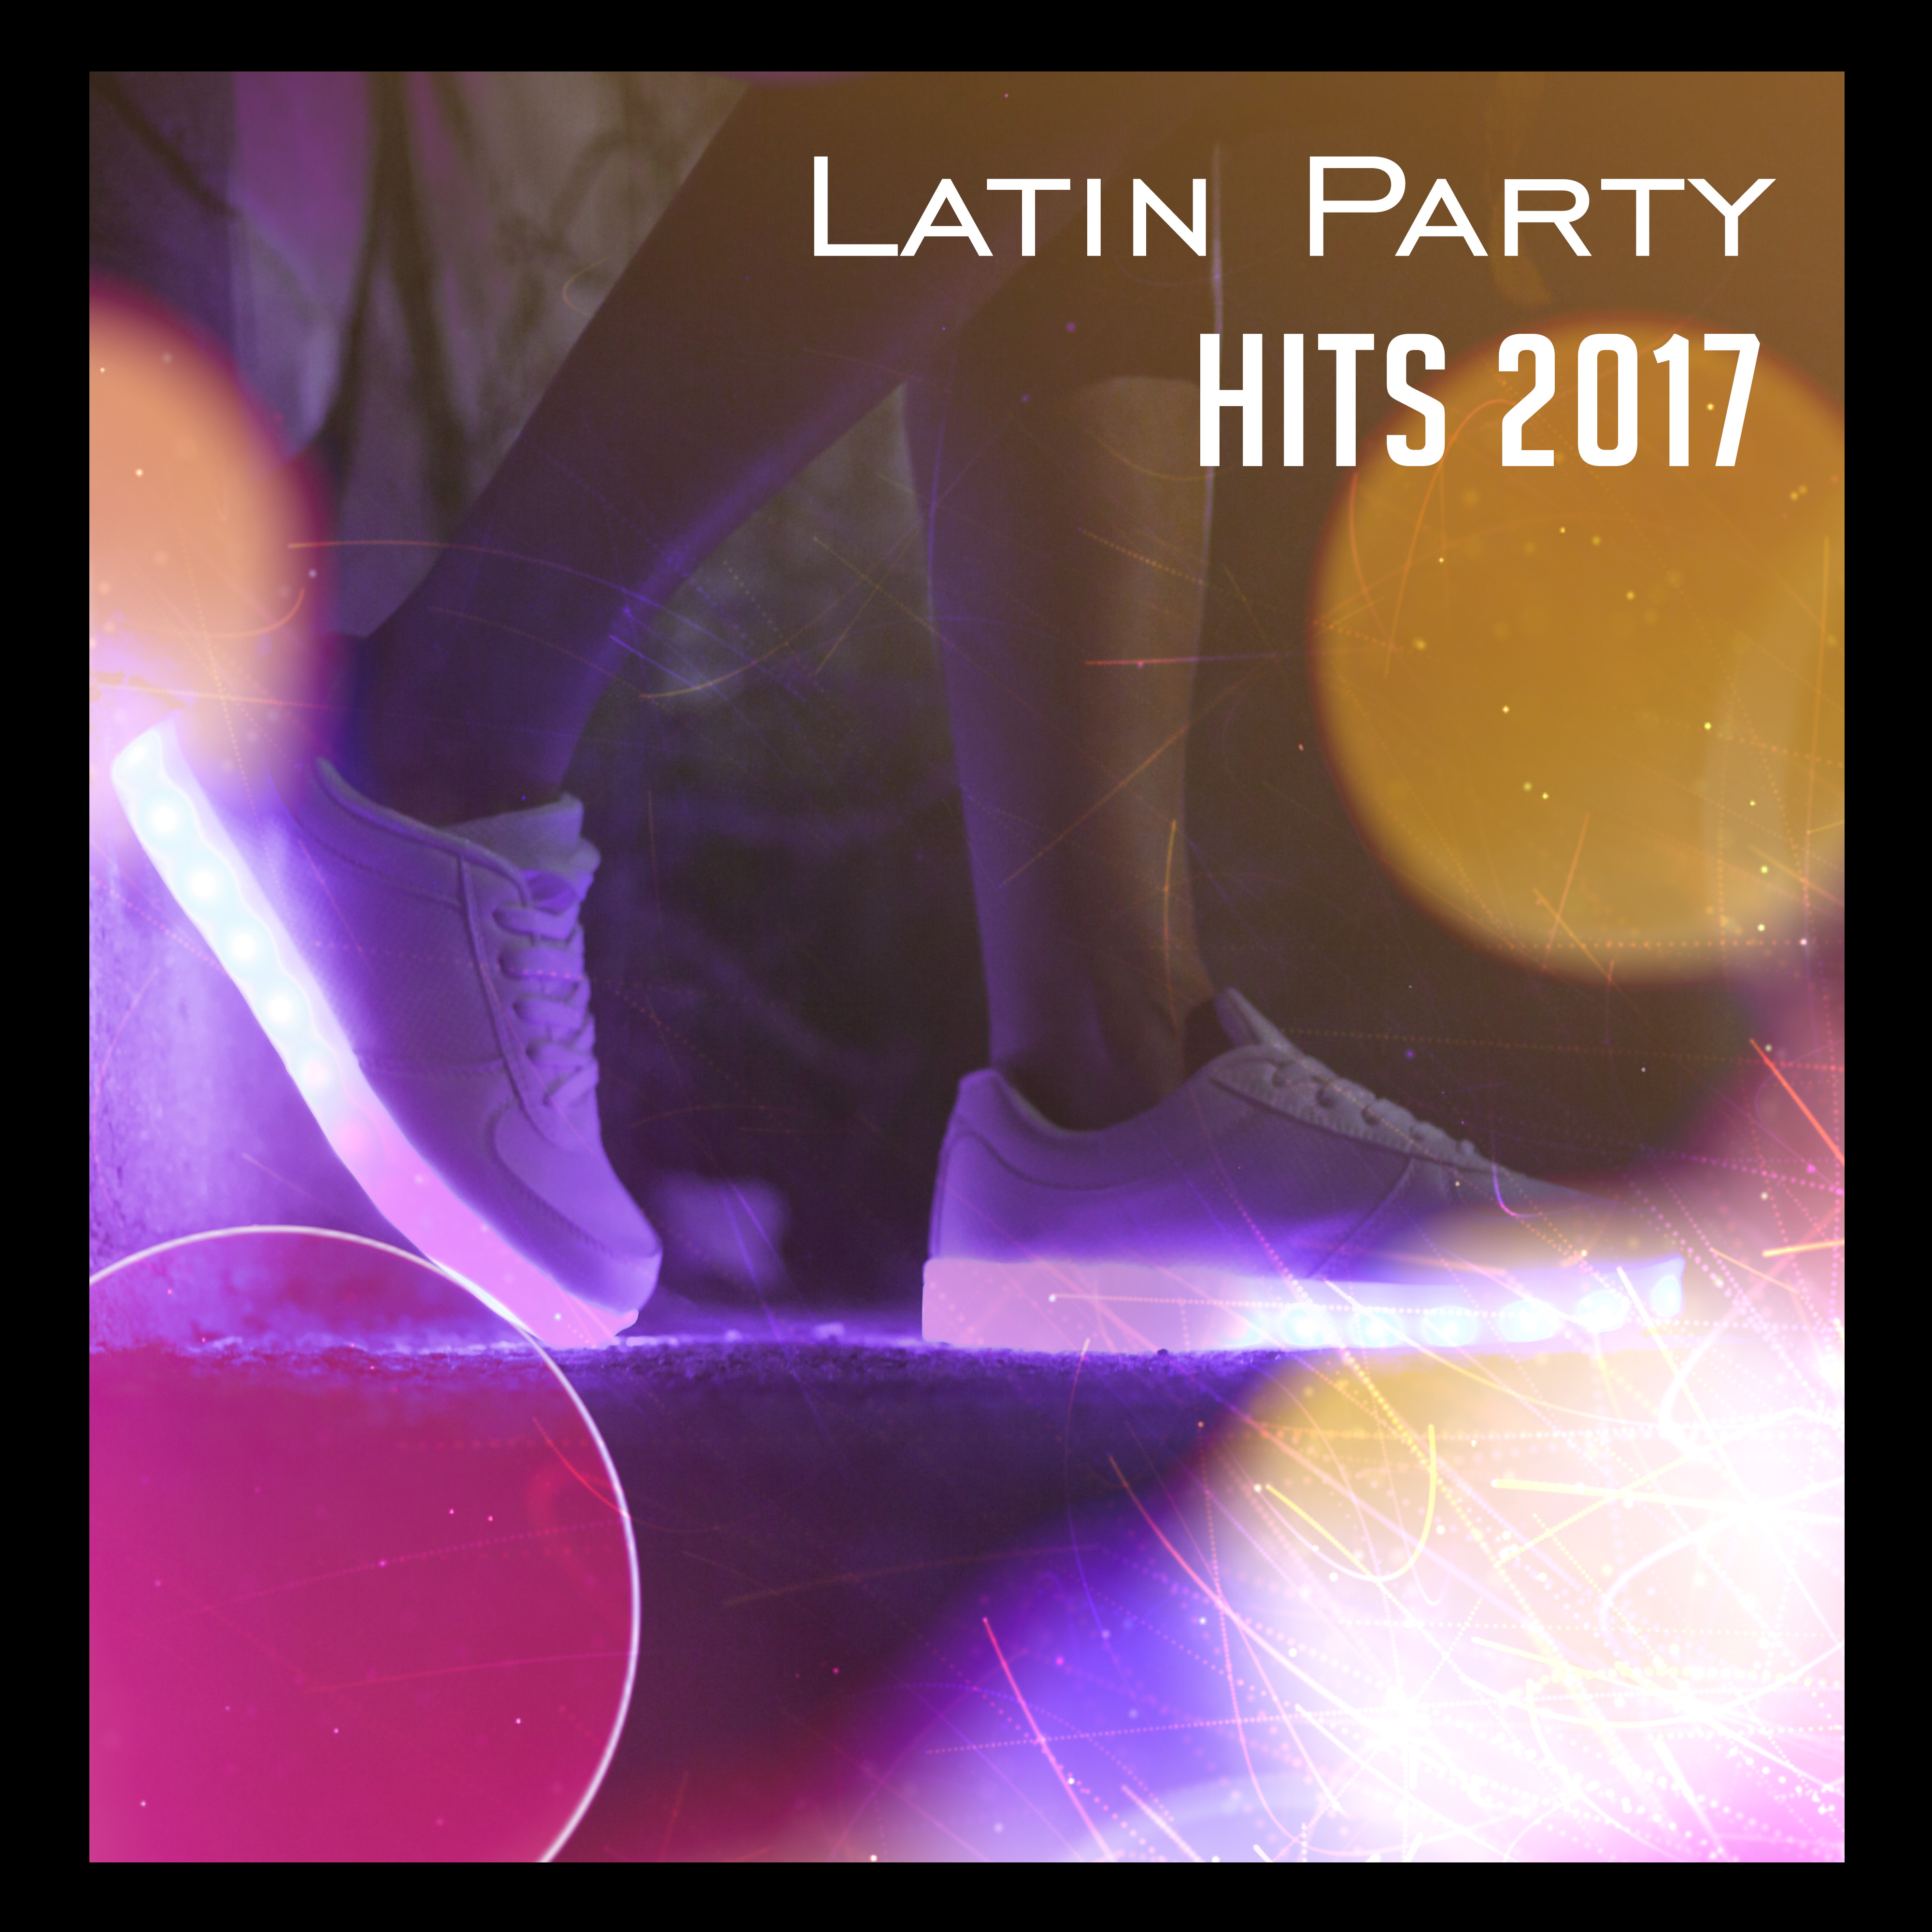 Latin Party Hits 2017  Music for Dancing: Salsa, Bachata, Mambo, Latino Dance Club, Party Time, Best Latin Sounds